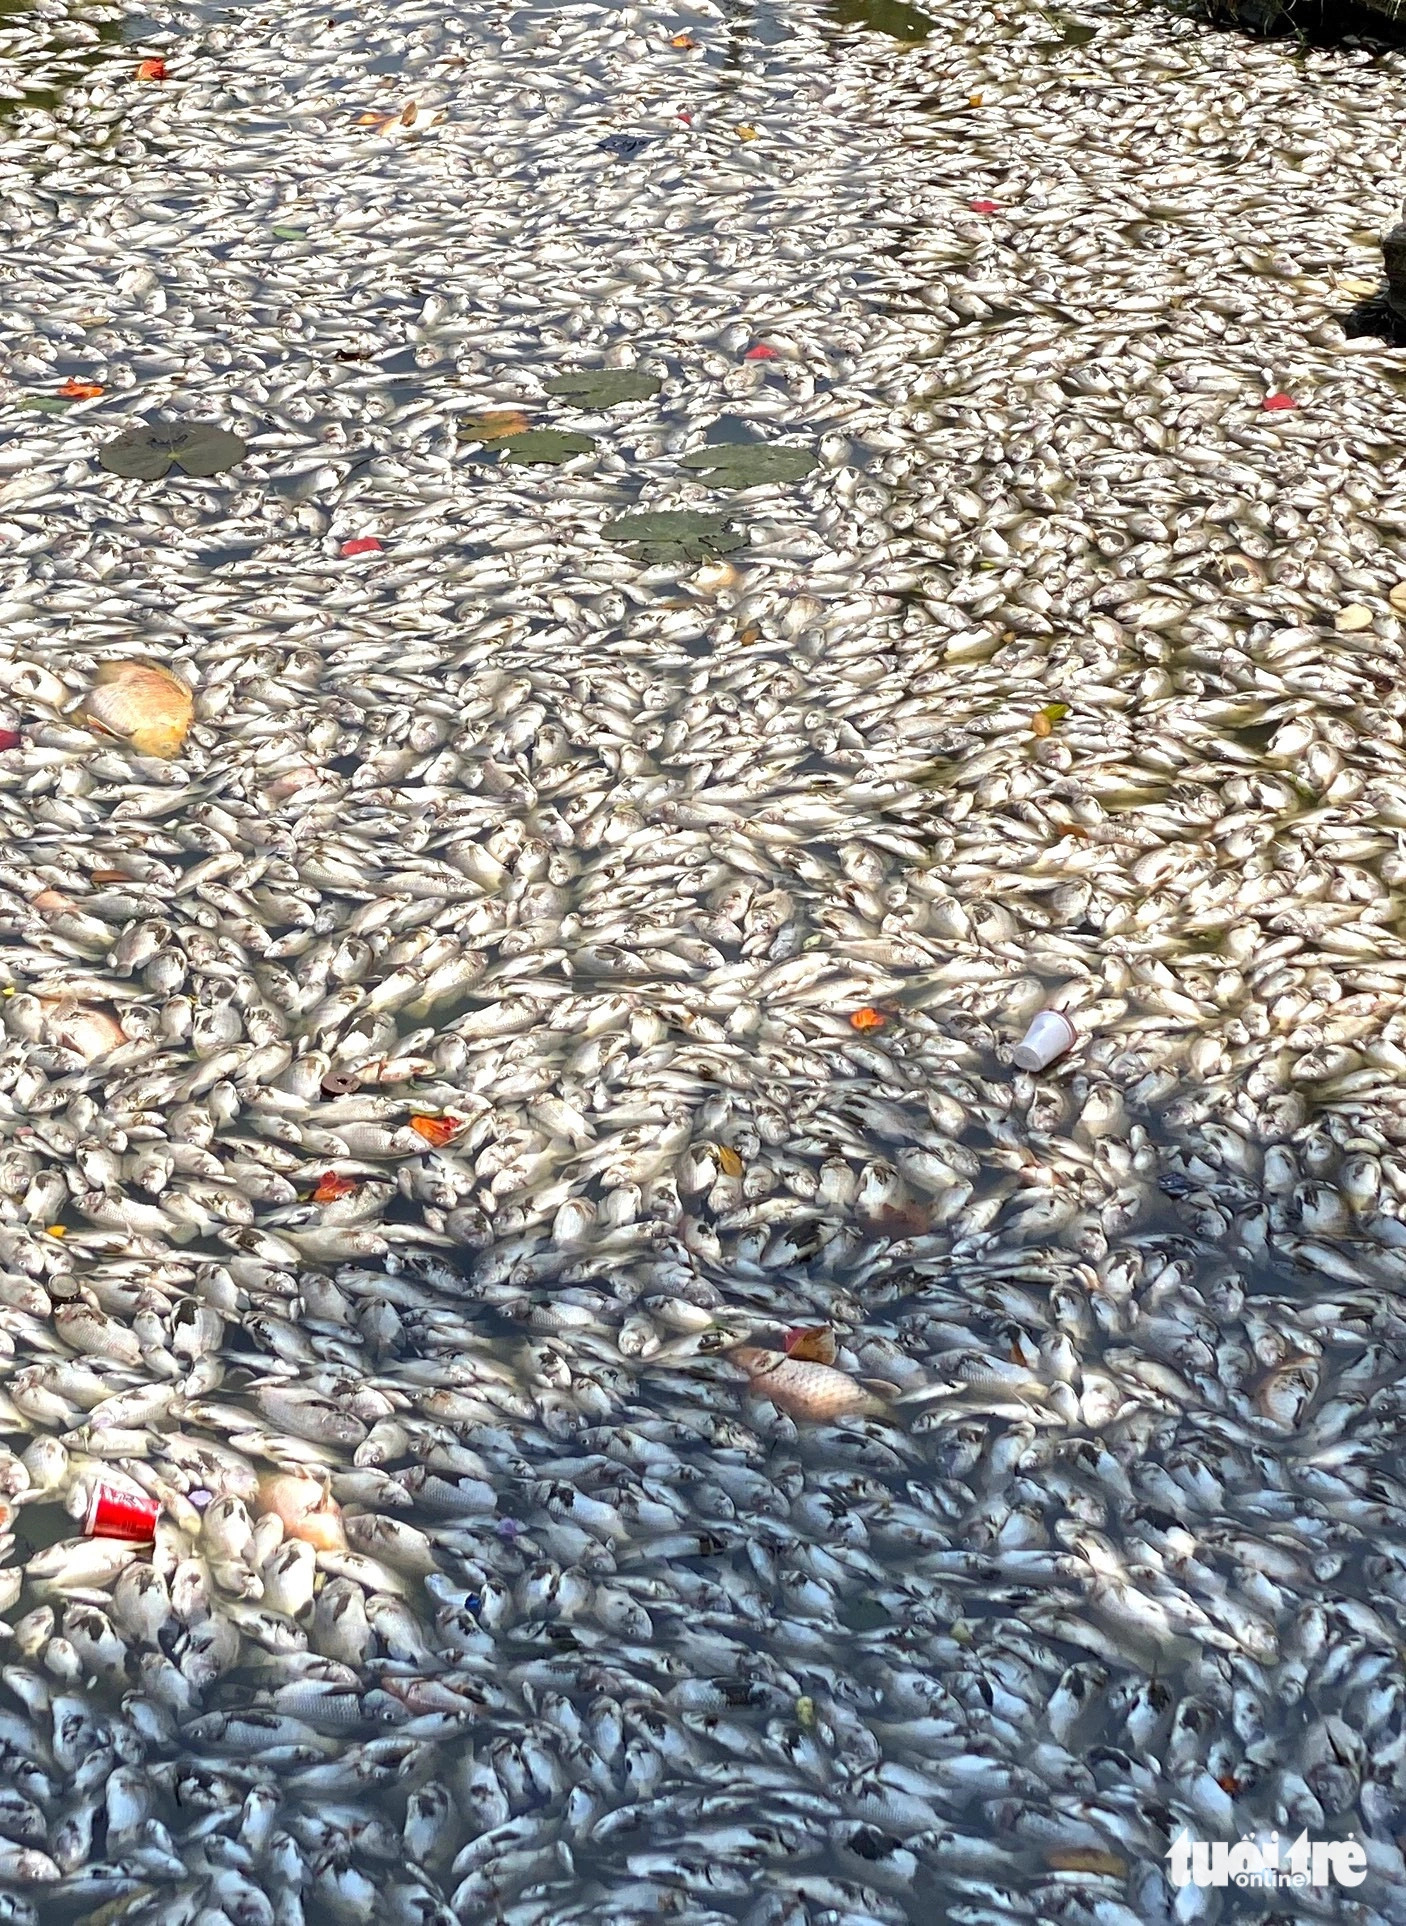 Countless dead fish have been found floating in a balancing lake in Quy Nhon City, Binh Dinh Province, south-central Vietnam. Photo: Lam Thien / Tuoi Tre